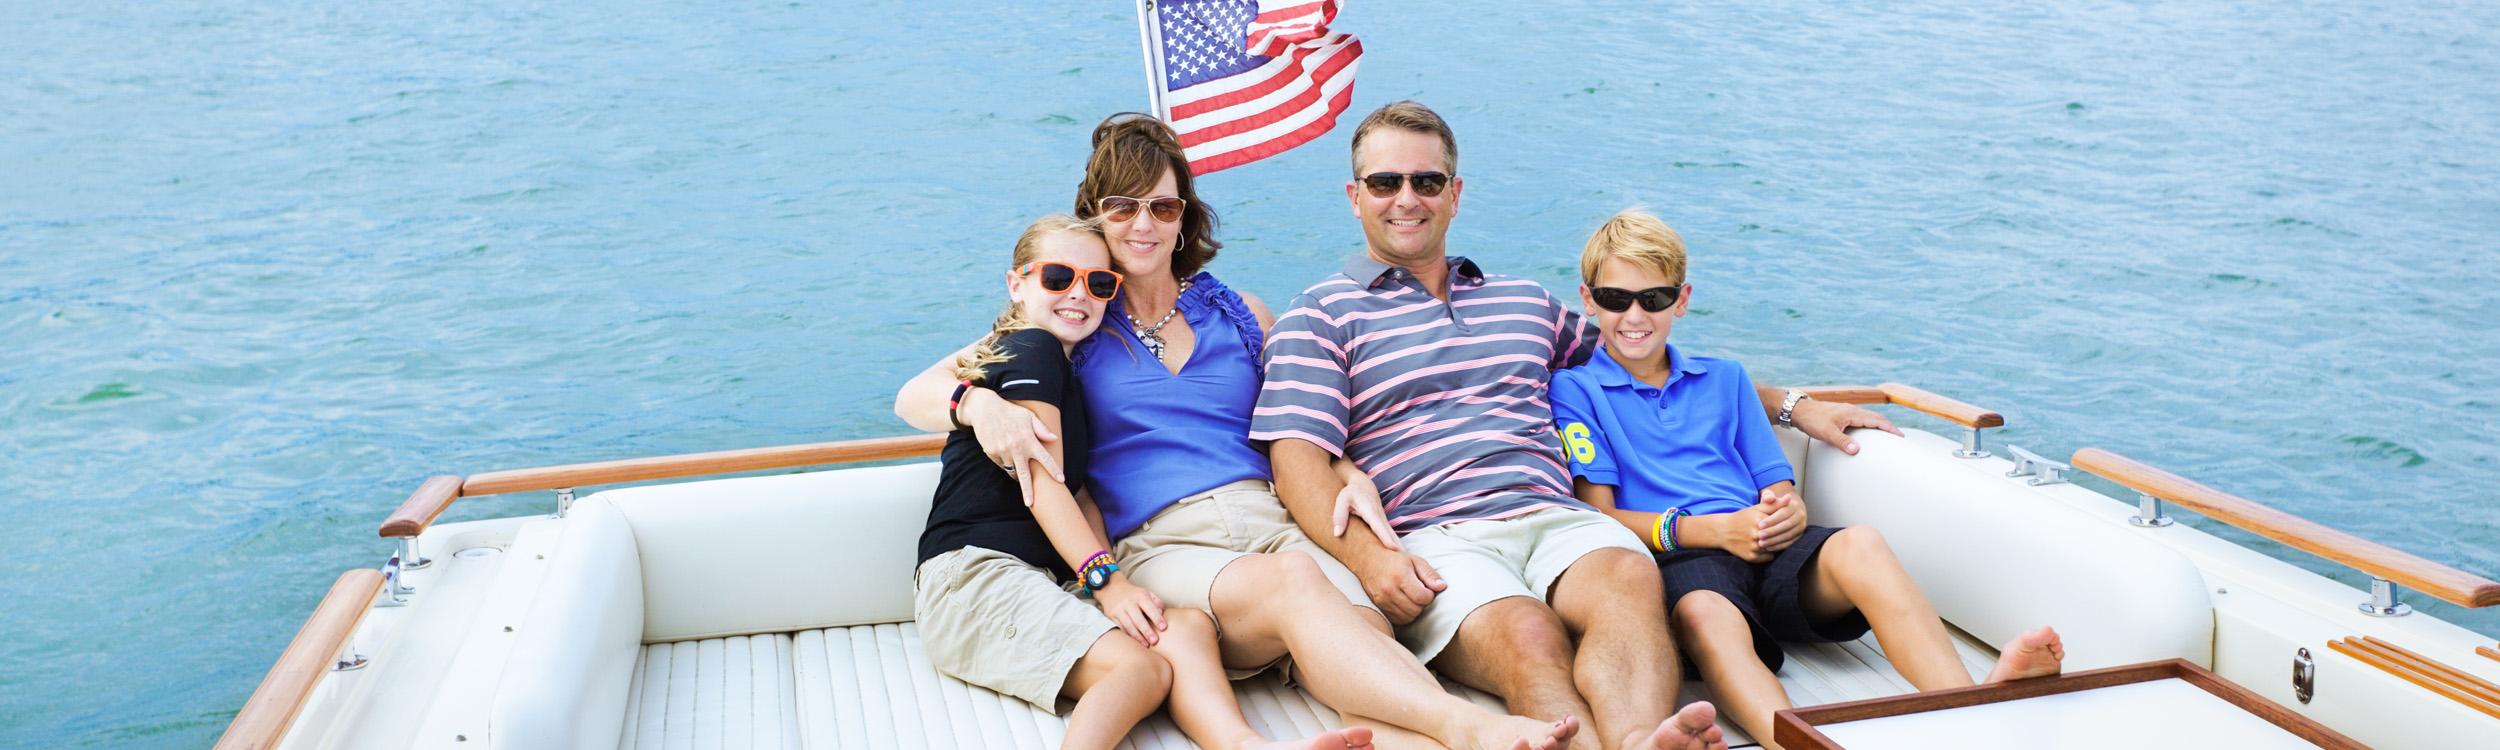 family of 4 siting together on a boat